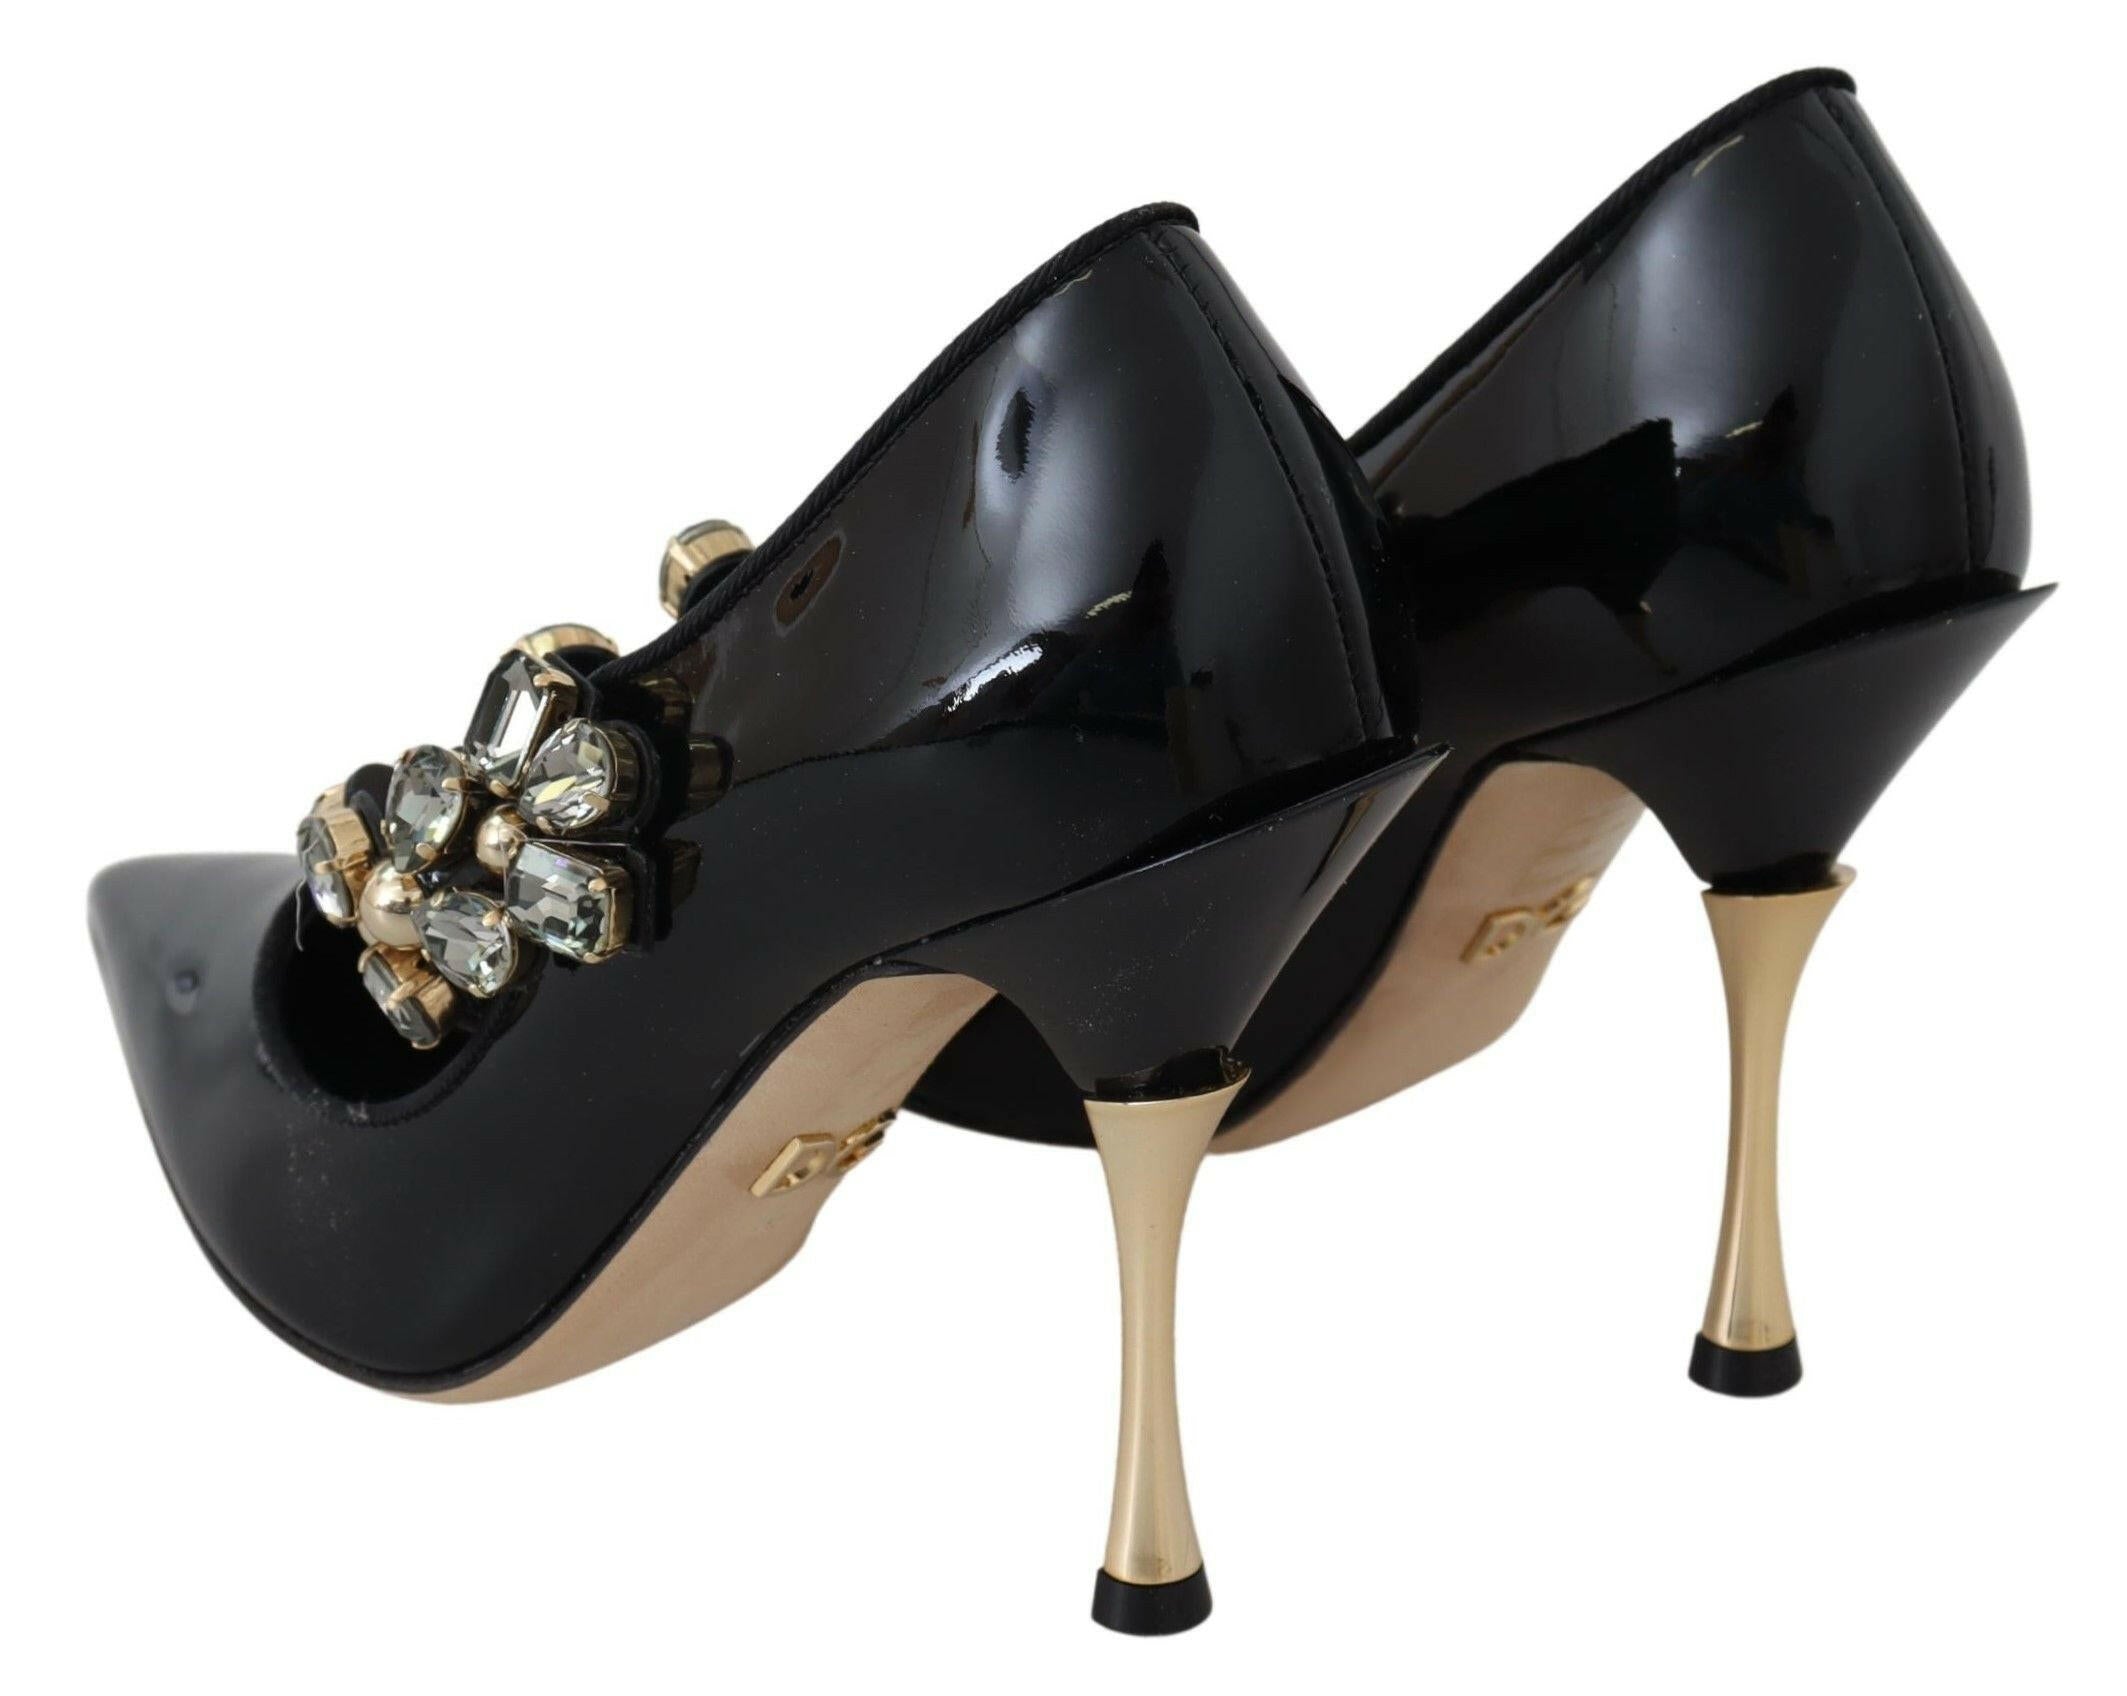 Dolce & Gabbana Black Leather Crystal Shoes Mary Jane Pumps - GENUINE AUTHENTIC BRAND LLC  